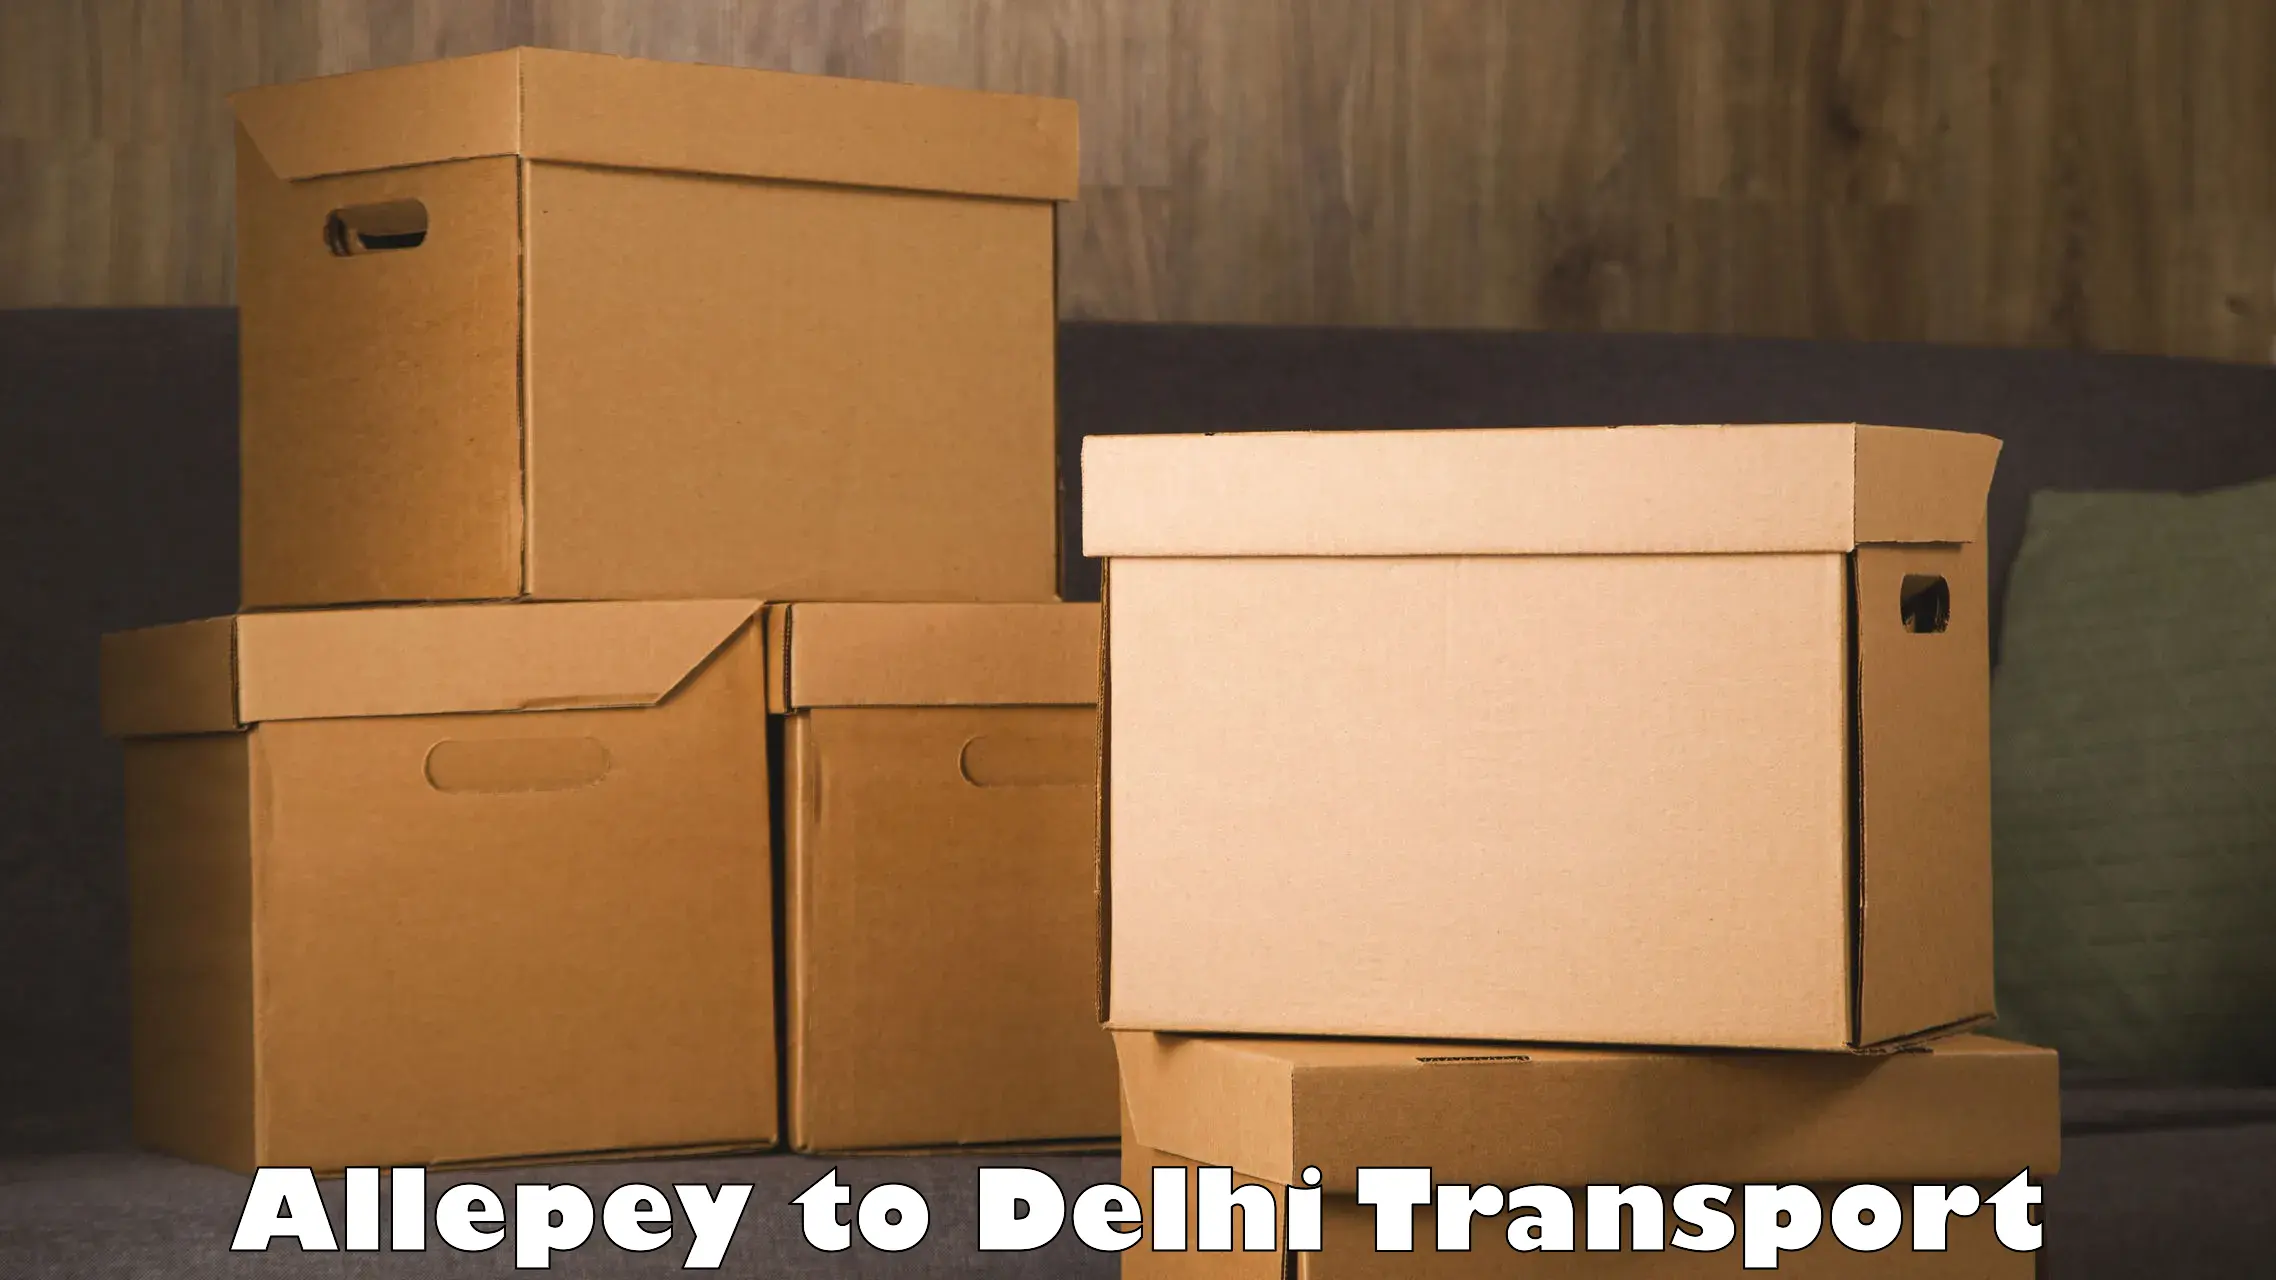 Commercial transport service Allepey to Indraprastha